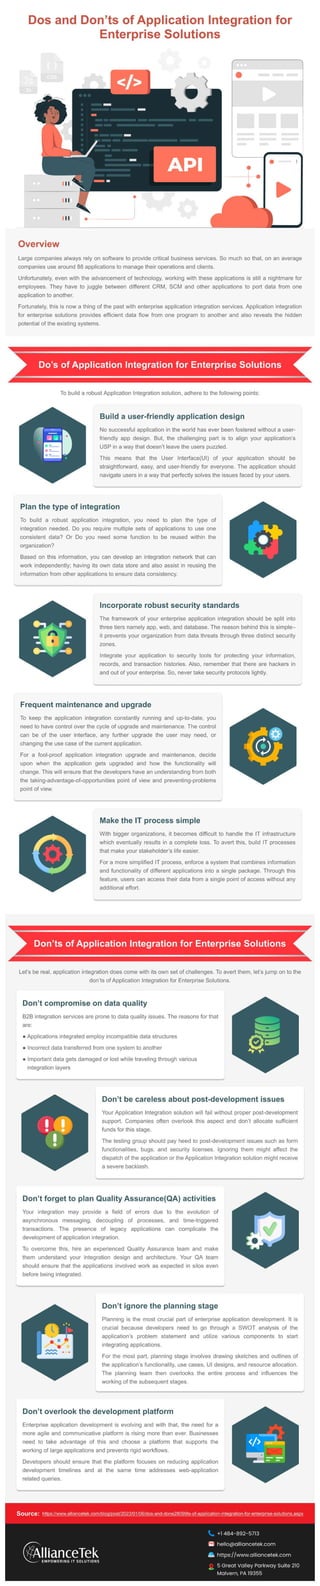 Dos and Don’ts of Application Integration for Enterprise Solutions